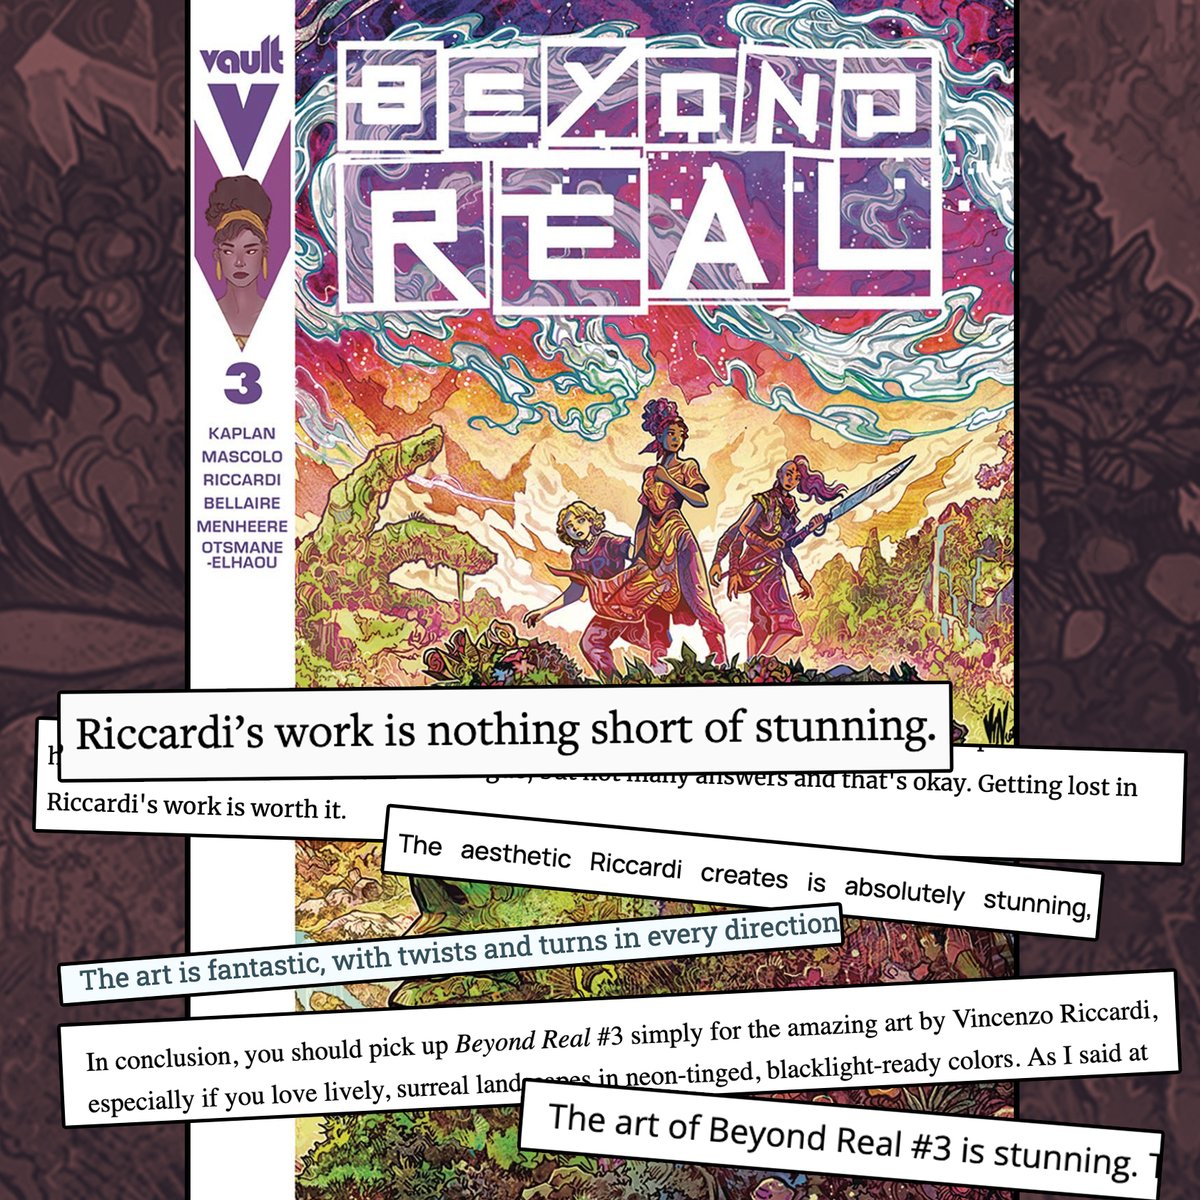 I don't usually comment reviews,but I'm really grateful for the reception of my work on #BeyondReal 3. Means a lot to me,I did this book going through a difficult time in my life, it helped me stay focused. I tried to do something different and special. I hope you're enjoying it!